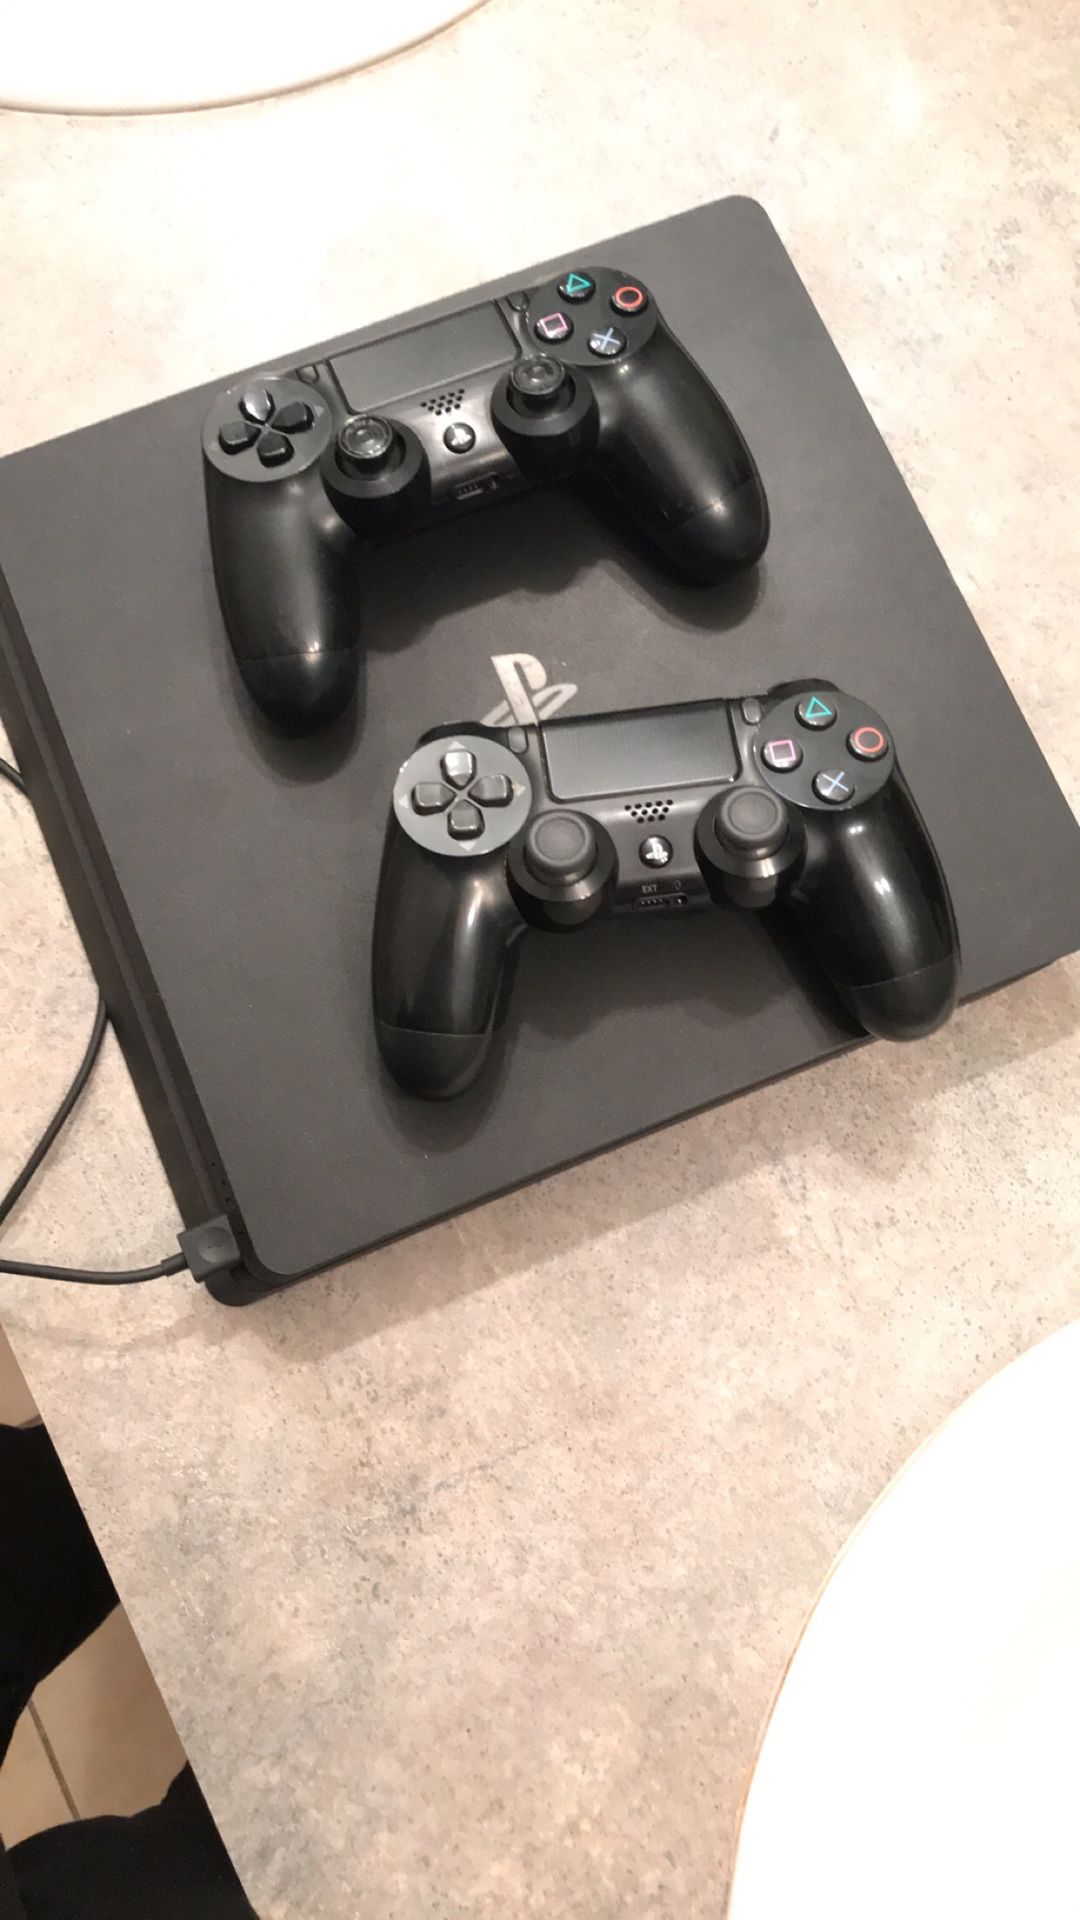 Ps4, W/2 controllers For sale (Barely used) Selling asap